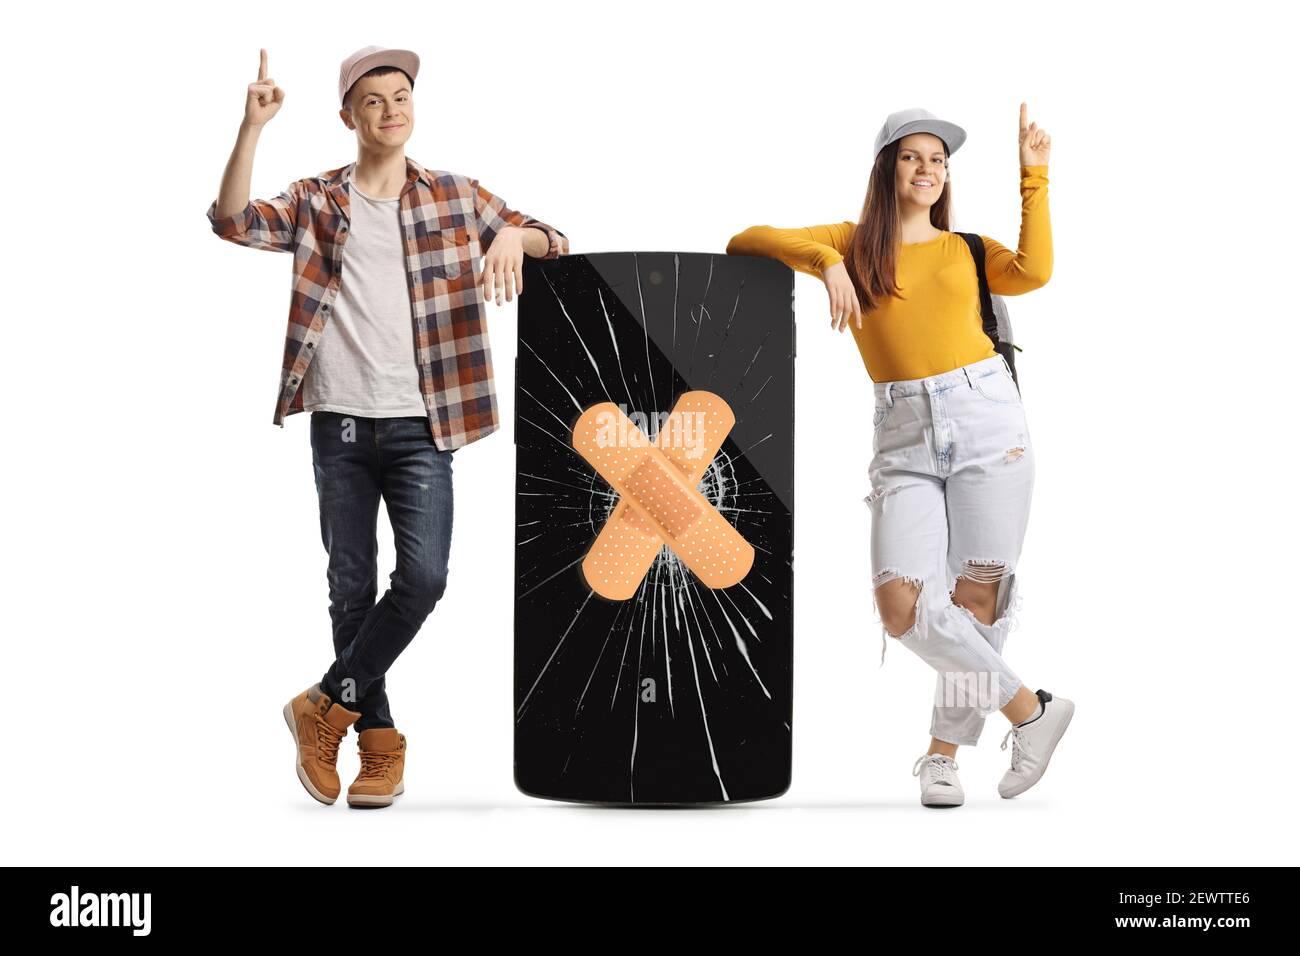 Full length portrait of male and female students leaning on a mobile phone with cracked screen and bandage and pointing up isolated on white backgroun Stock Photo